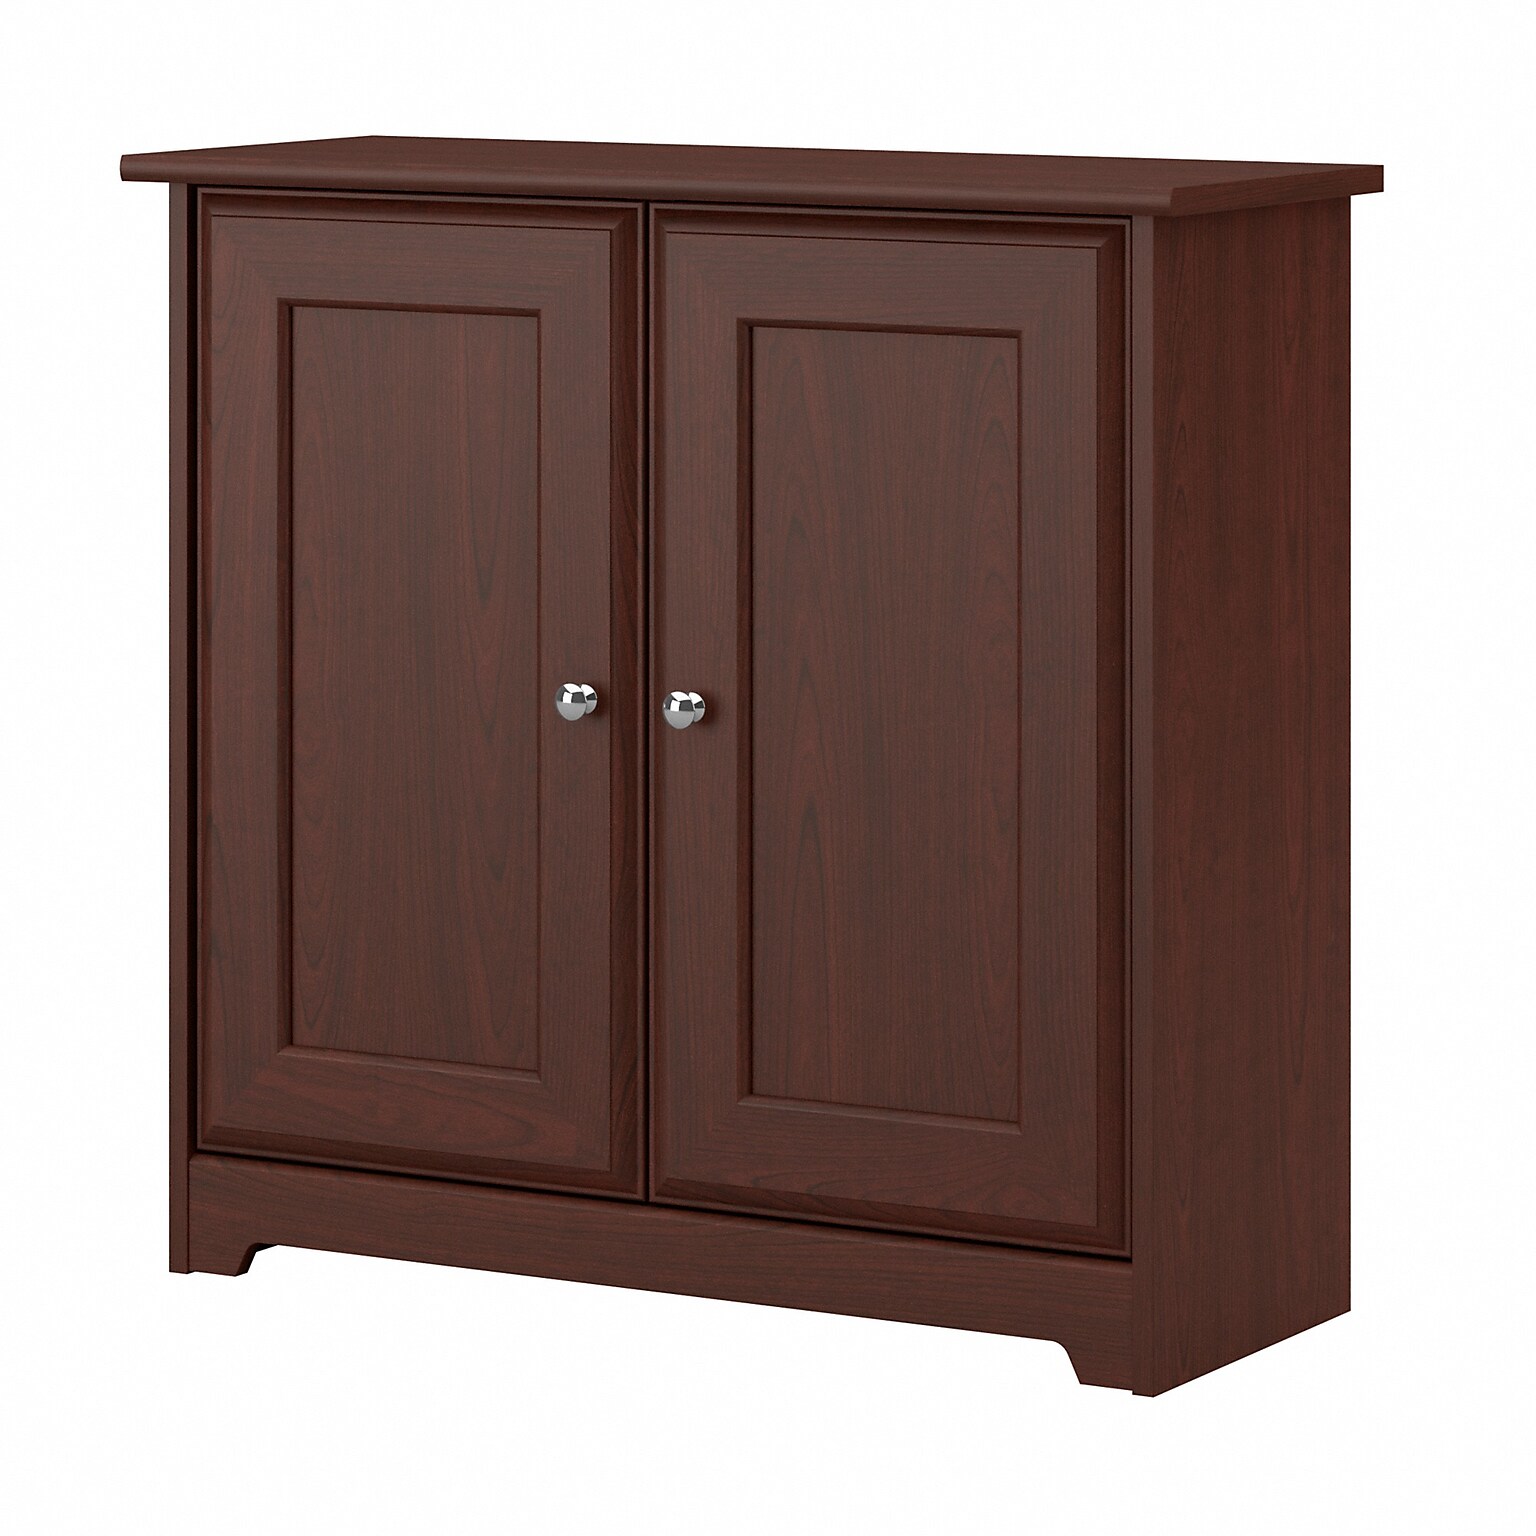 Bush Furniture Cabot 30H Small Storage Cabinet with Doors, Harvest Cherry (WC31498)